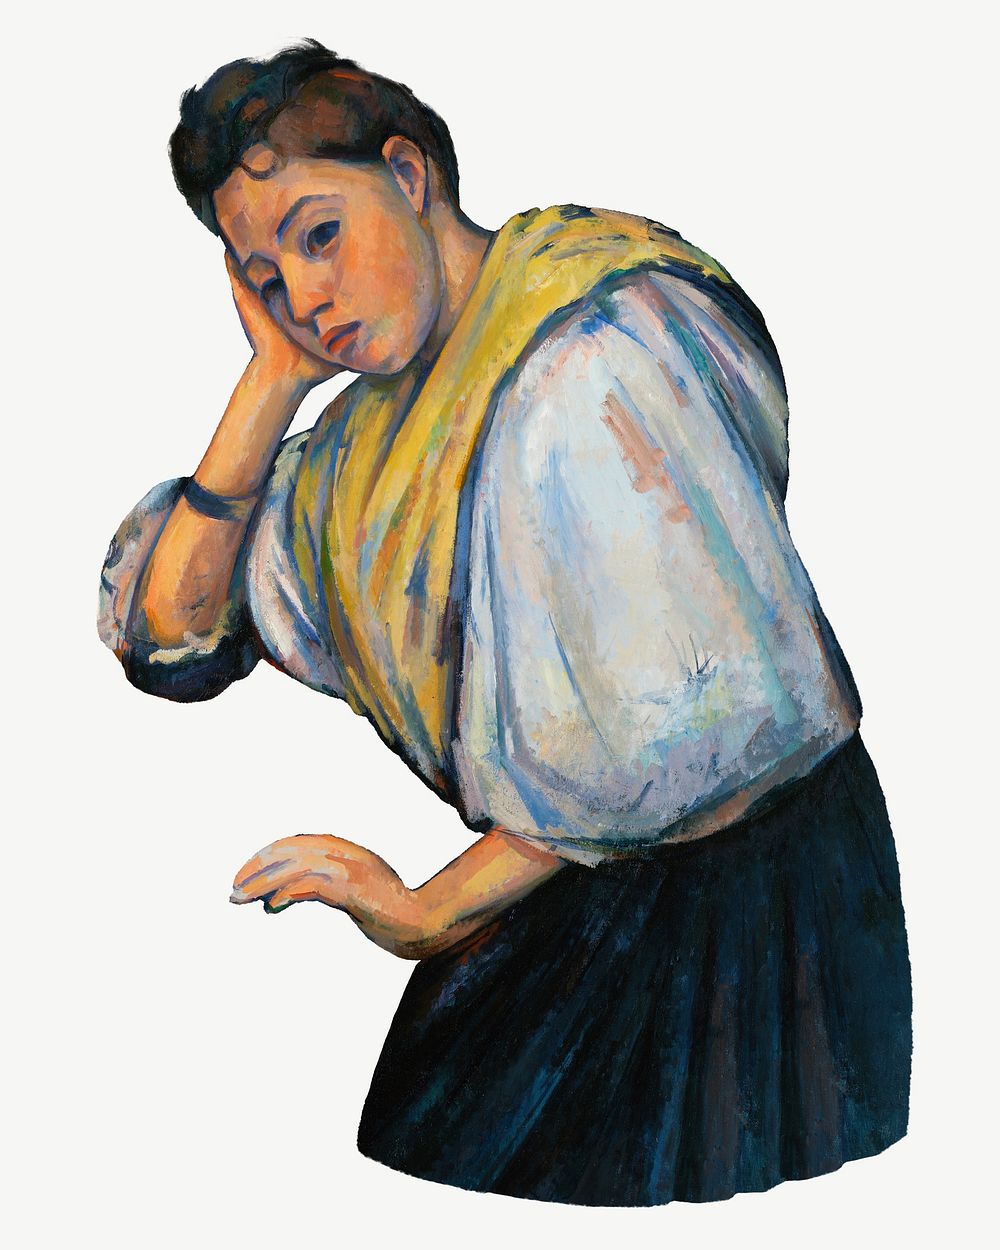  Paul Cezanne&rsquo;s Italian Woman clipart, post-impressionist portrait painting psd.  Remixed by rawpixel.